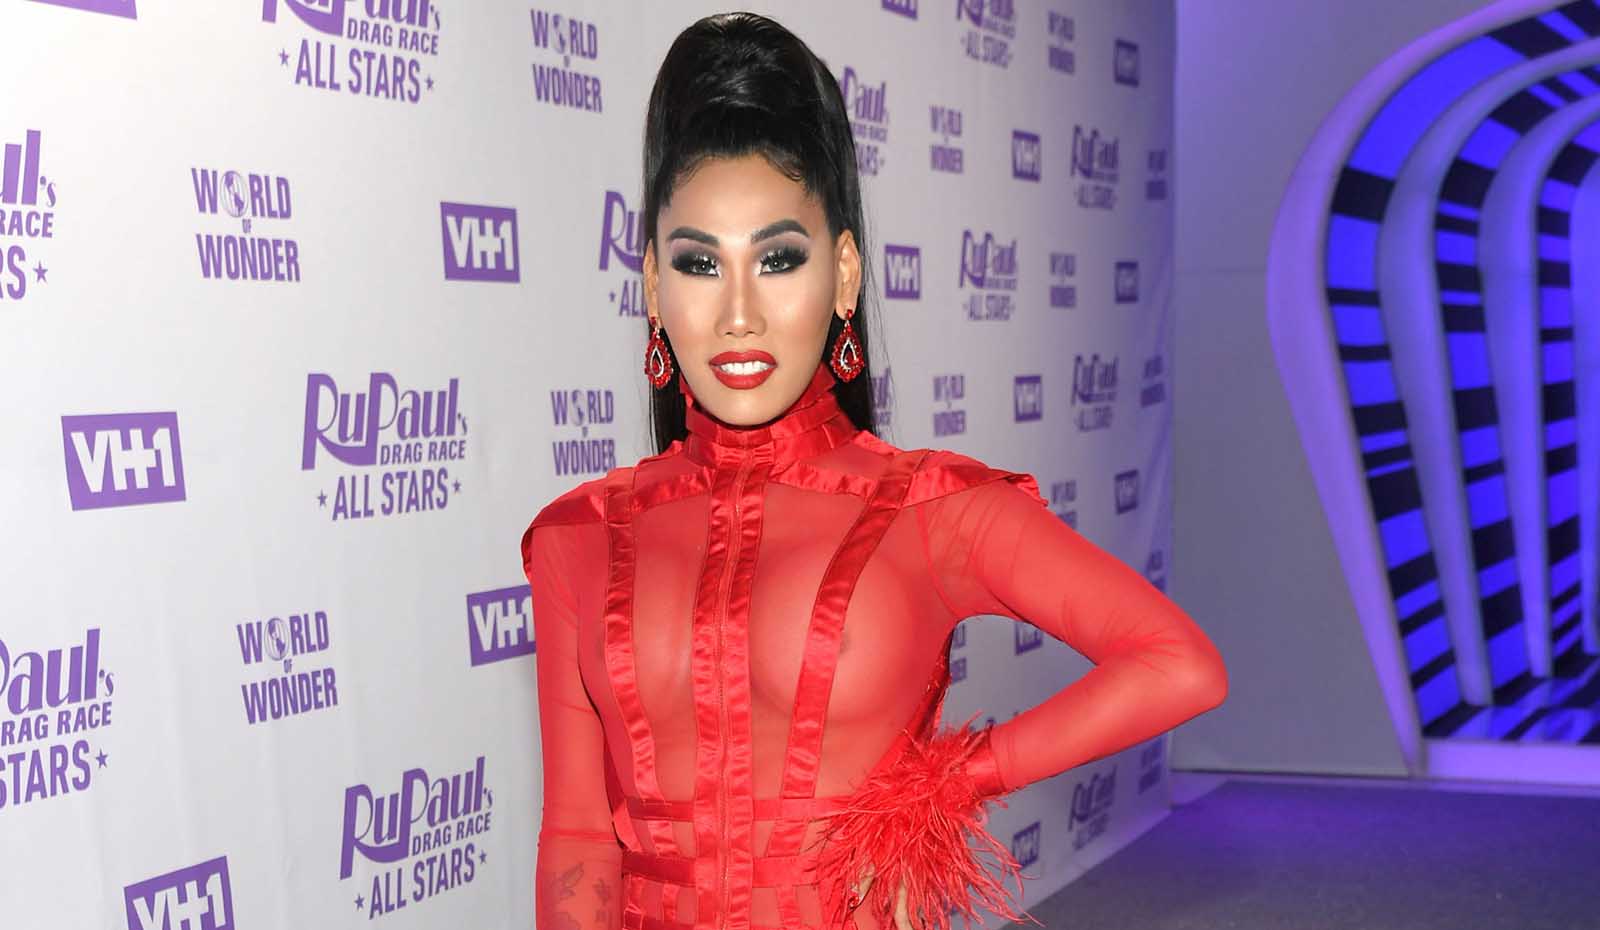 With the announcement of 'RuPaul's Drag Race' season 13's queens, many are wondering how diverse this year's group is. See for yourself.